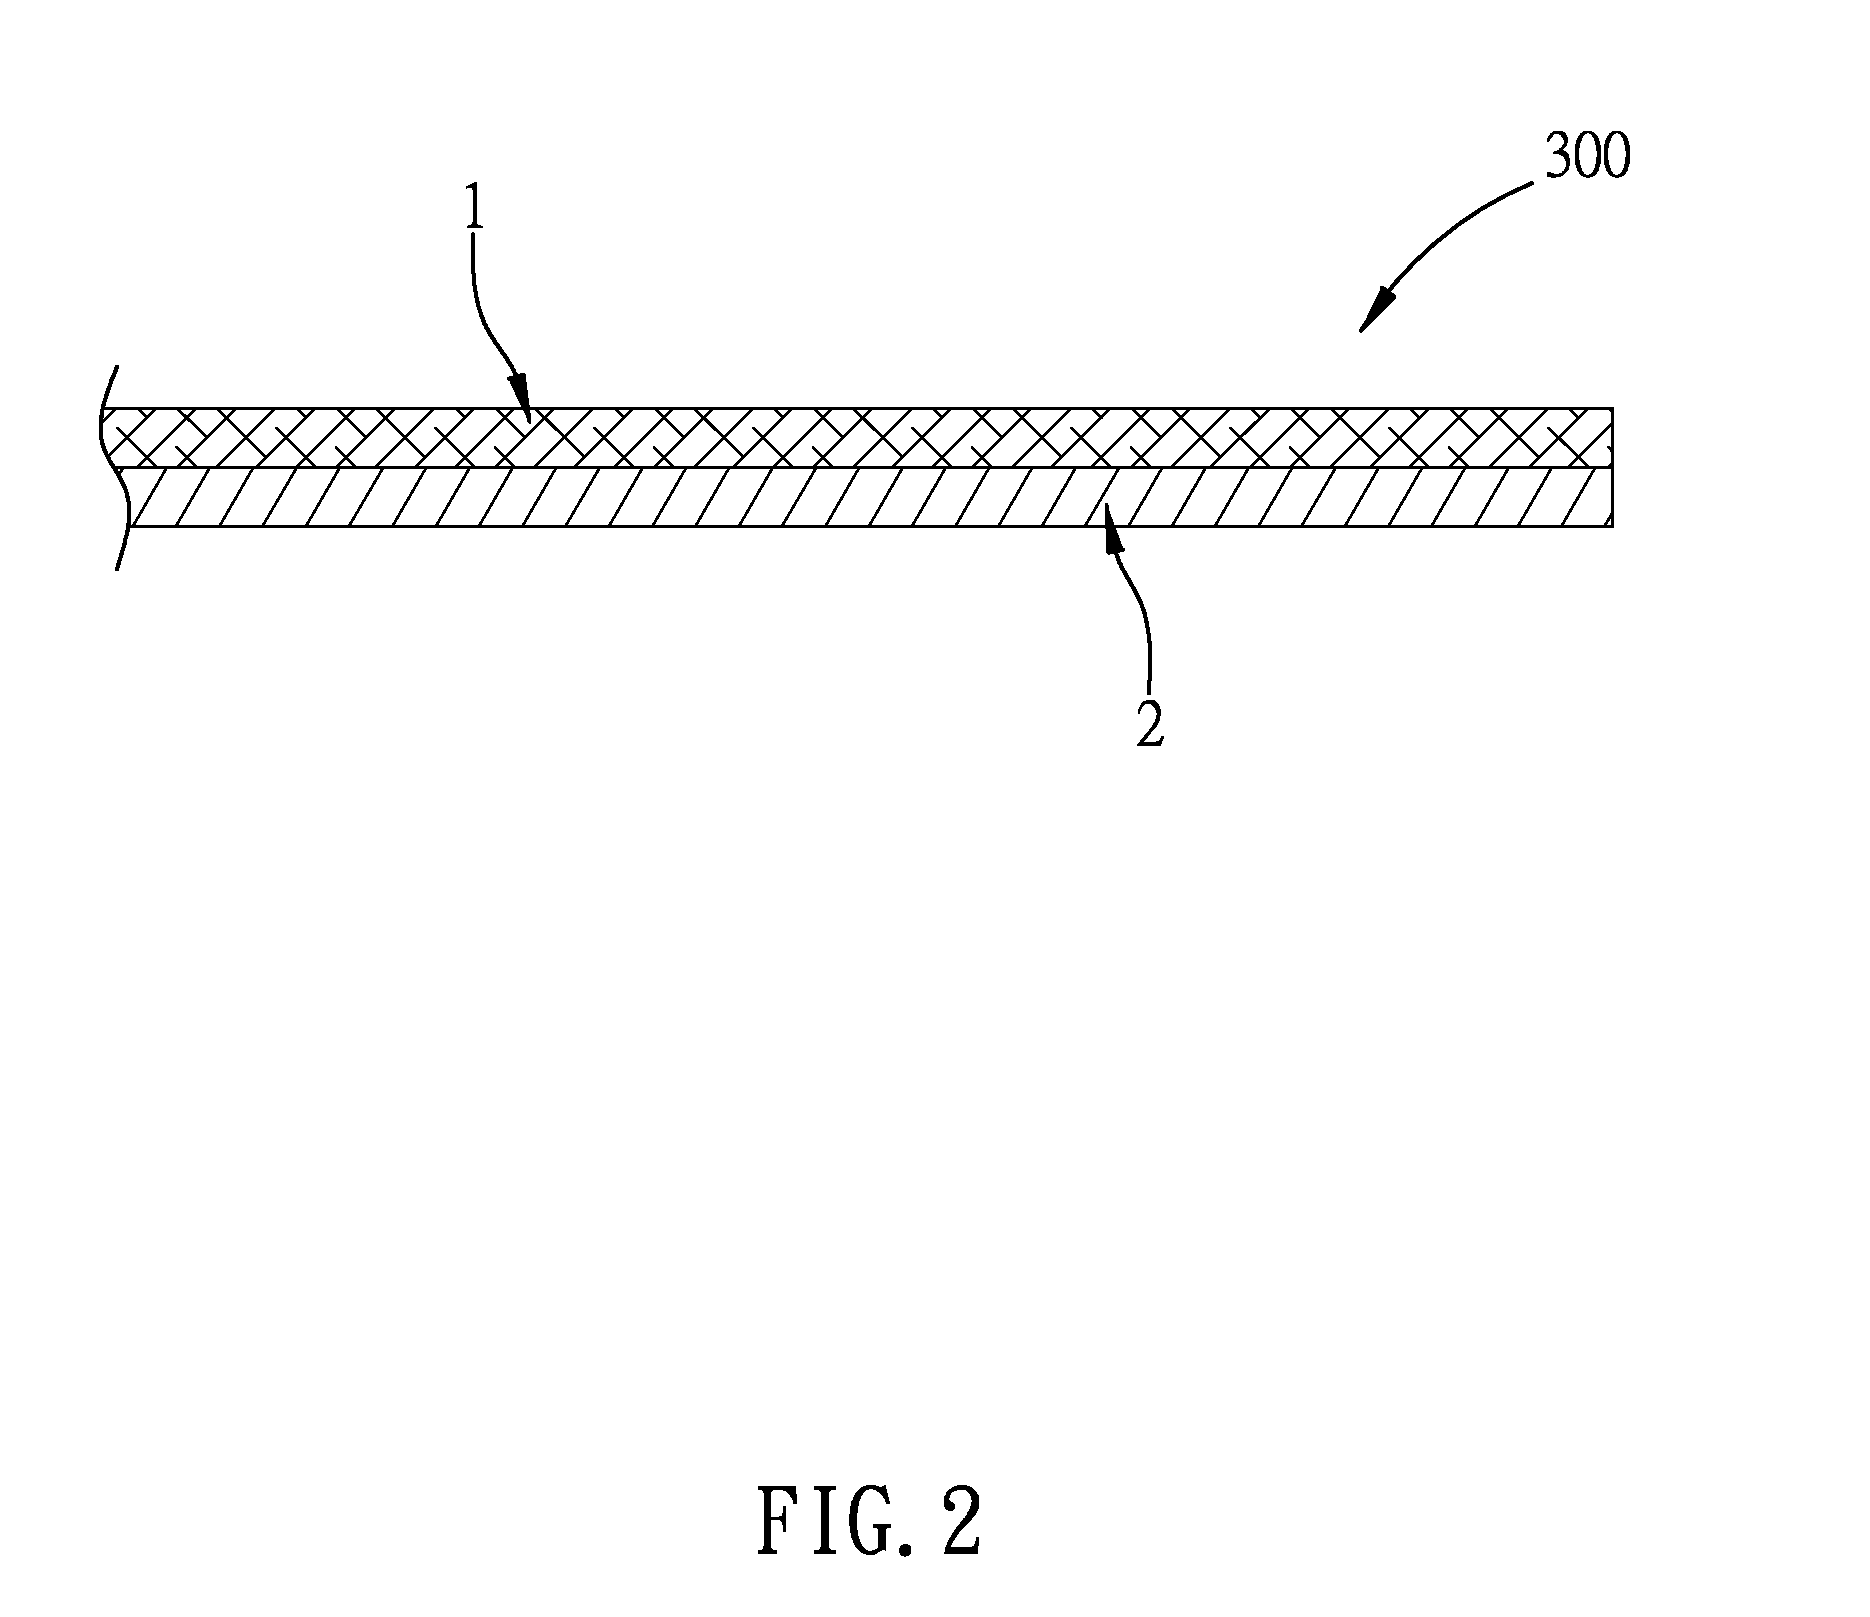 Method for making an air permeable and waterproof textile with an uneven pattern